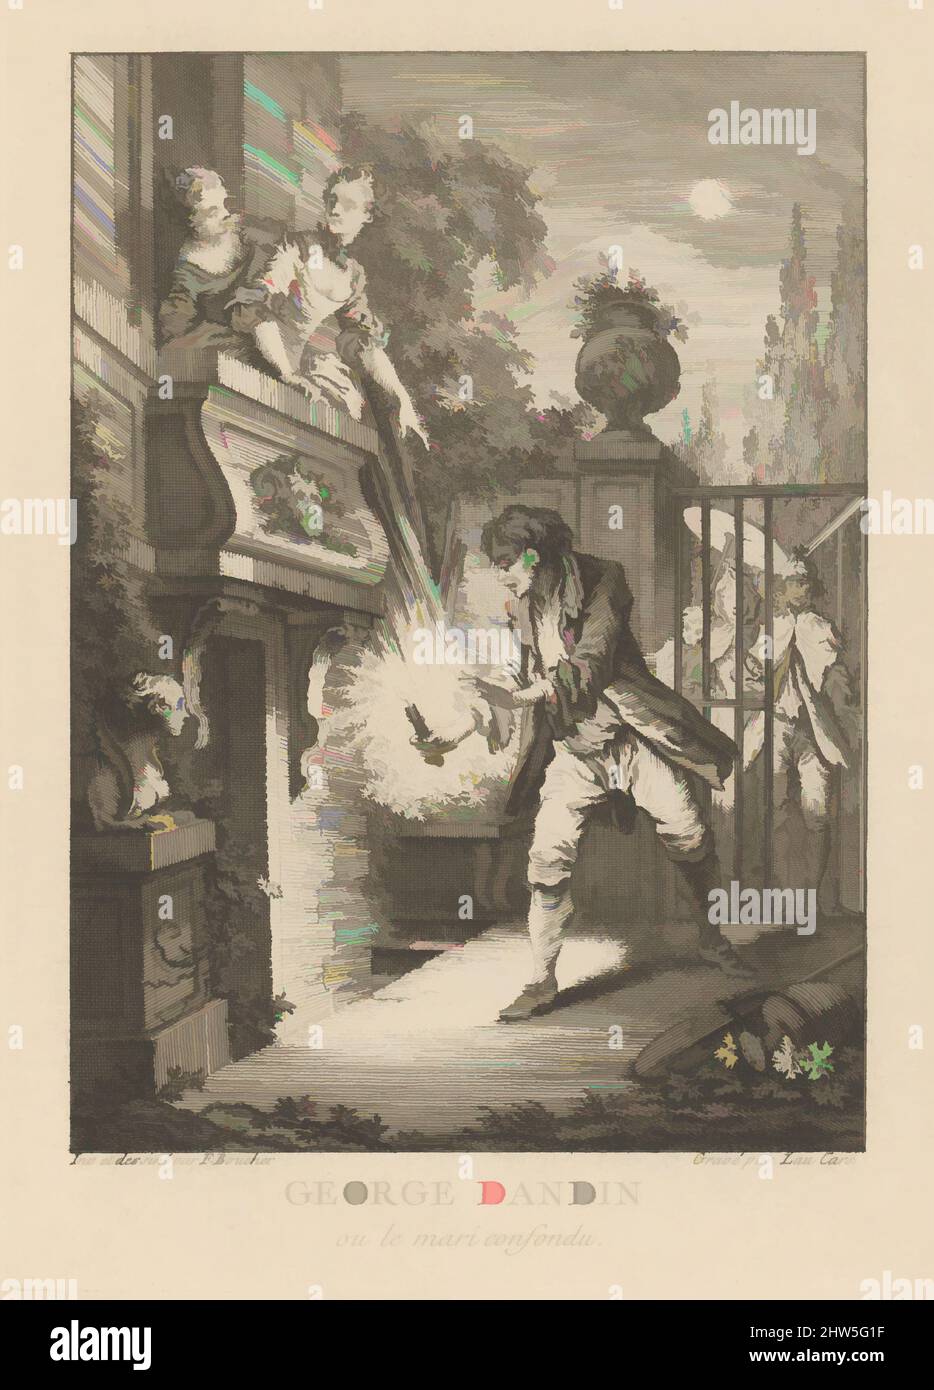 Art inspired by Gravures de Boucher pour les Oeuvres de Molière Figures de Boucher pour Molière, mid-18th century, Drawing in graphite; etching; engraving; mezzotint, Overall: 16 7/16 x 11 1/16 x 7/8 in. (41.7 x 28.1 x 2.2 cm), Books, Portrait of Moliere drawn by Jean-Baptiste, Classic works modernized by Artotop with a splash of modernity. Shapes, color and value, eye-catching visual impact on art. Emotions through freedom of artworks in a contemporary way. A timeless message pursuing a wildly creative new direction. Artists turning to the digital medium and creating the Artotop NFT Stock Photo